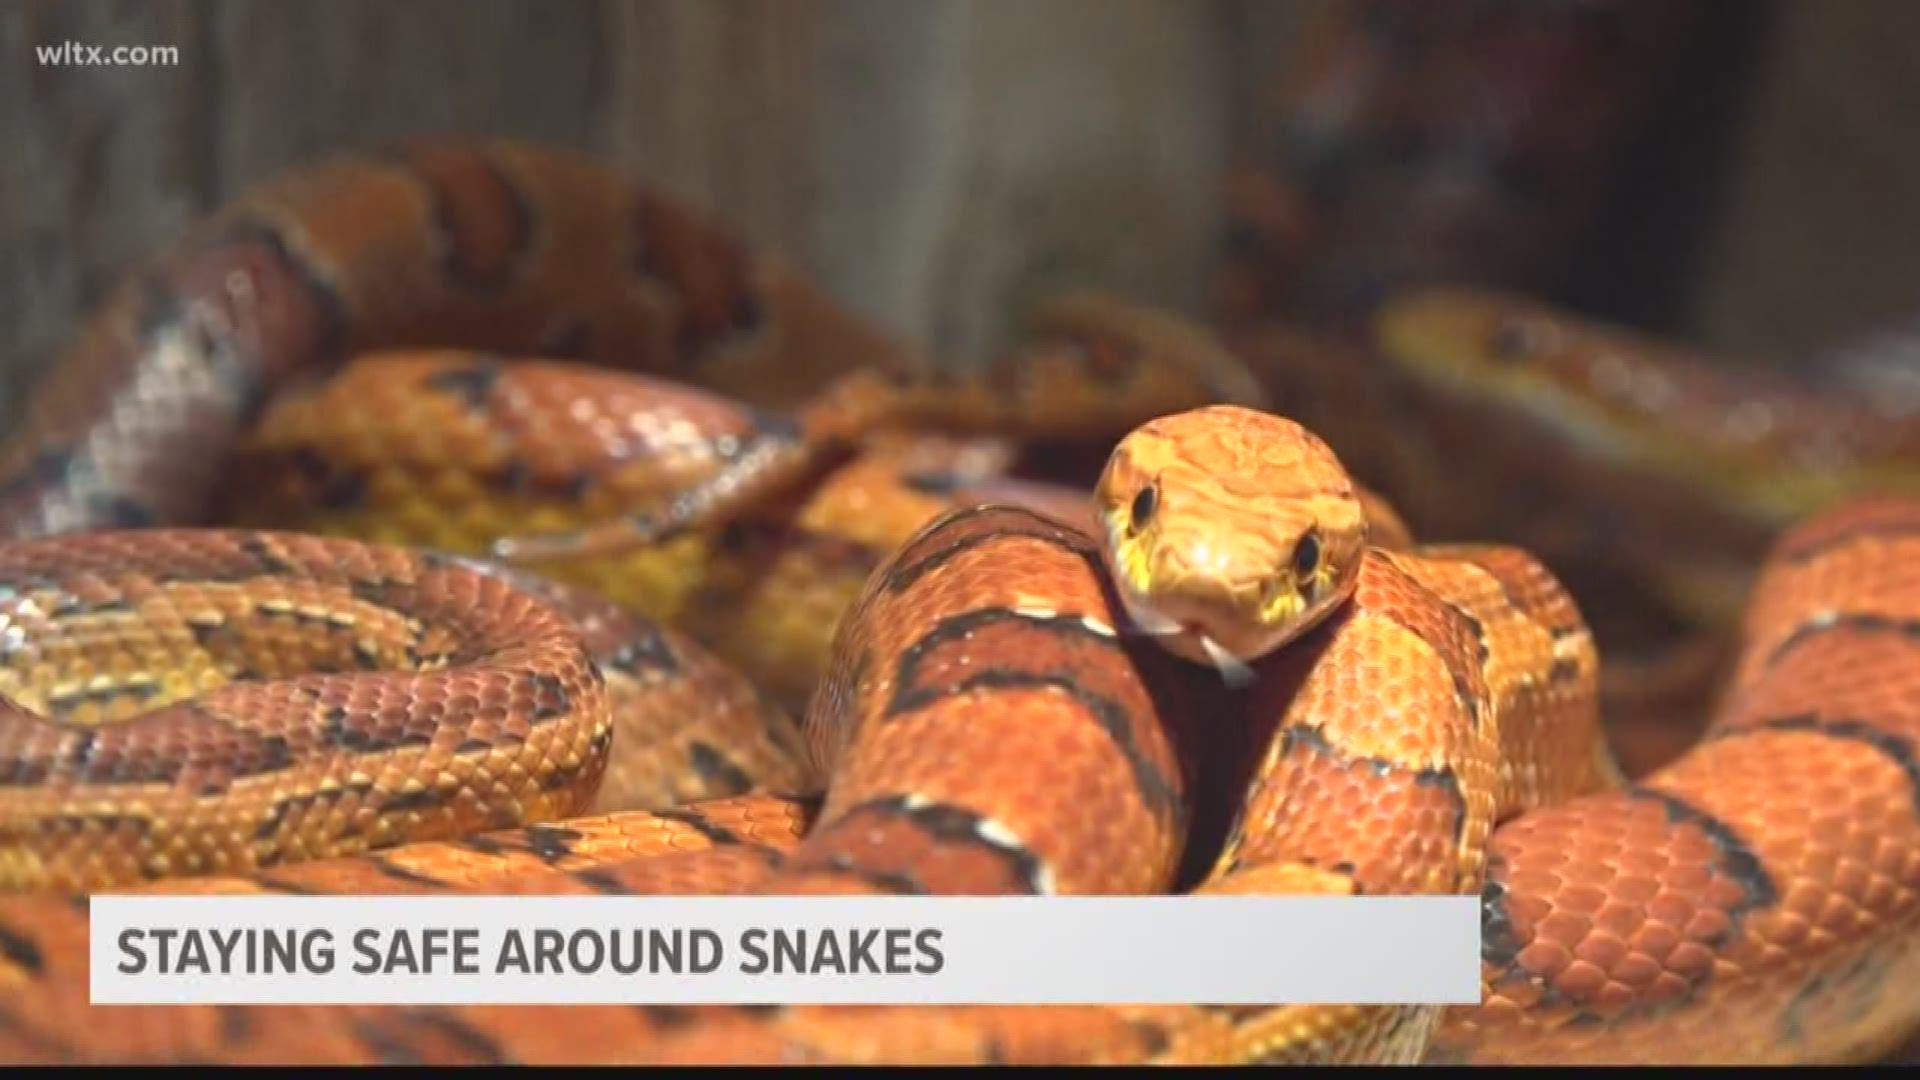 We spoke with Scott Pfaff curator of herpetology at the Riverbank Zoo to  learn  more about the snake bites and what you should know if you encounter these creatures....